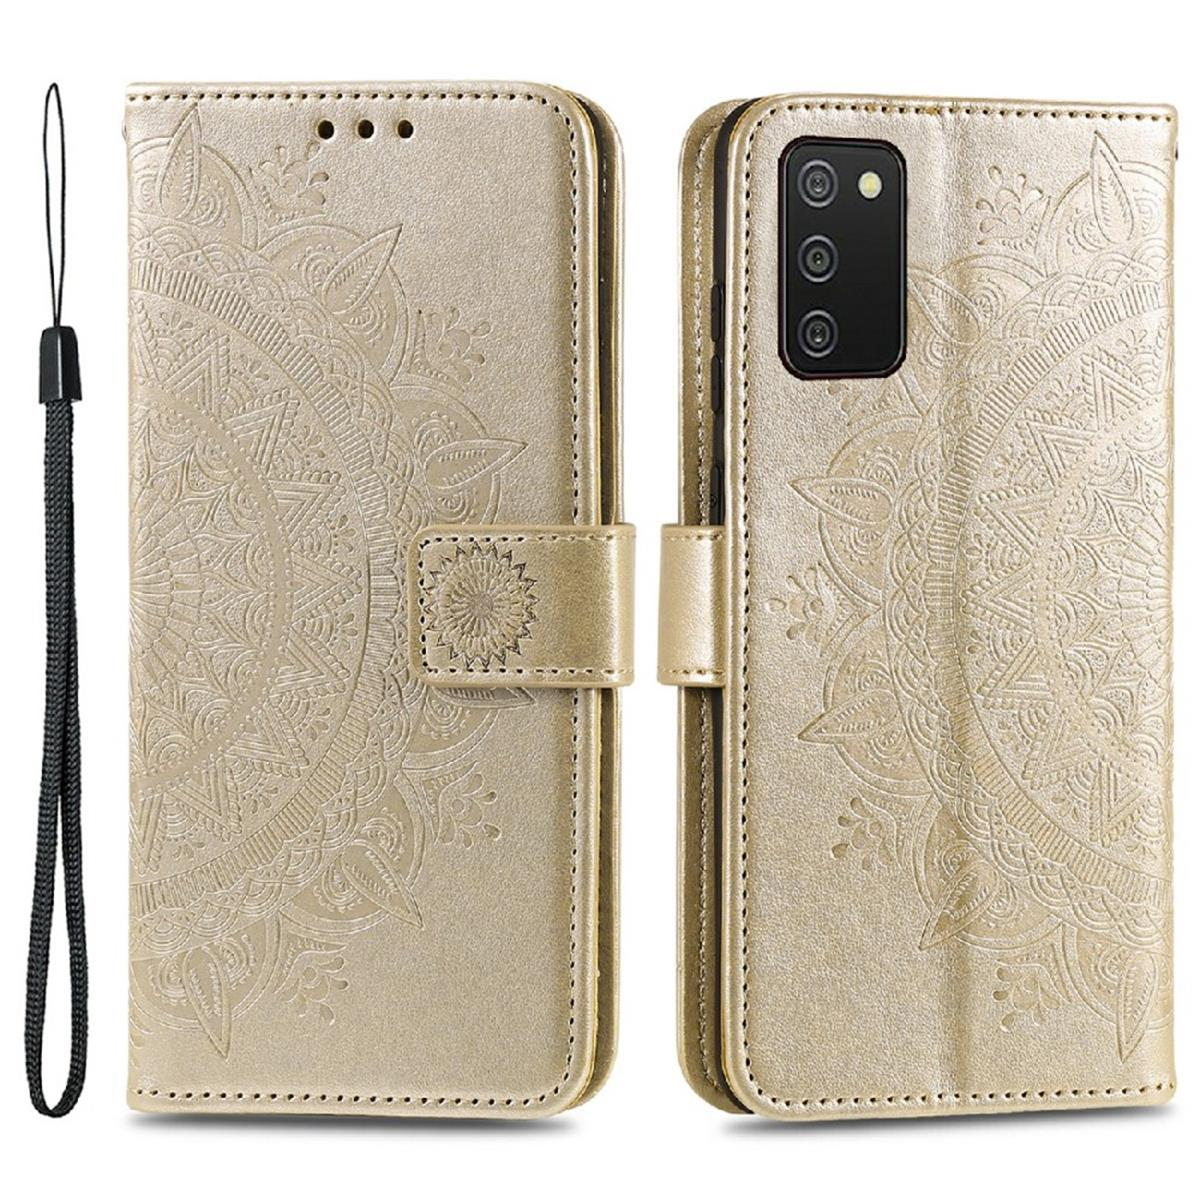 A03s, Klapphülle Mandala Galaxy mit COVERKINGZ Samsung, Gold Muster, Bookcover,